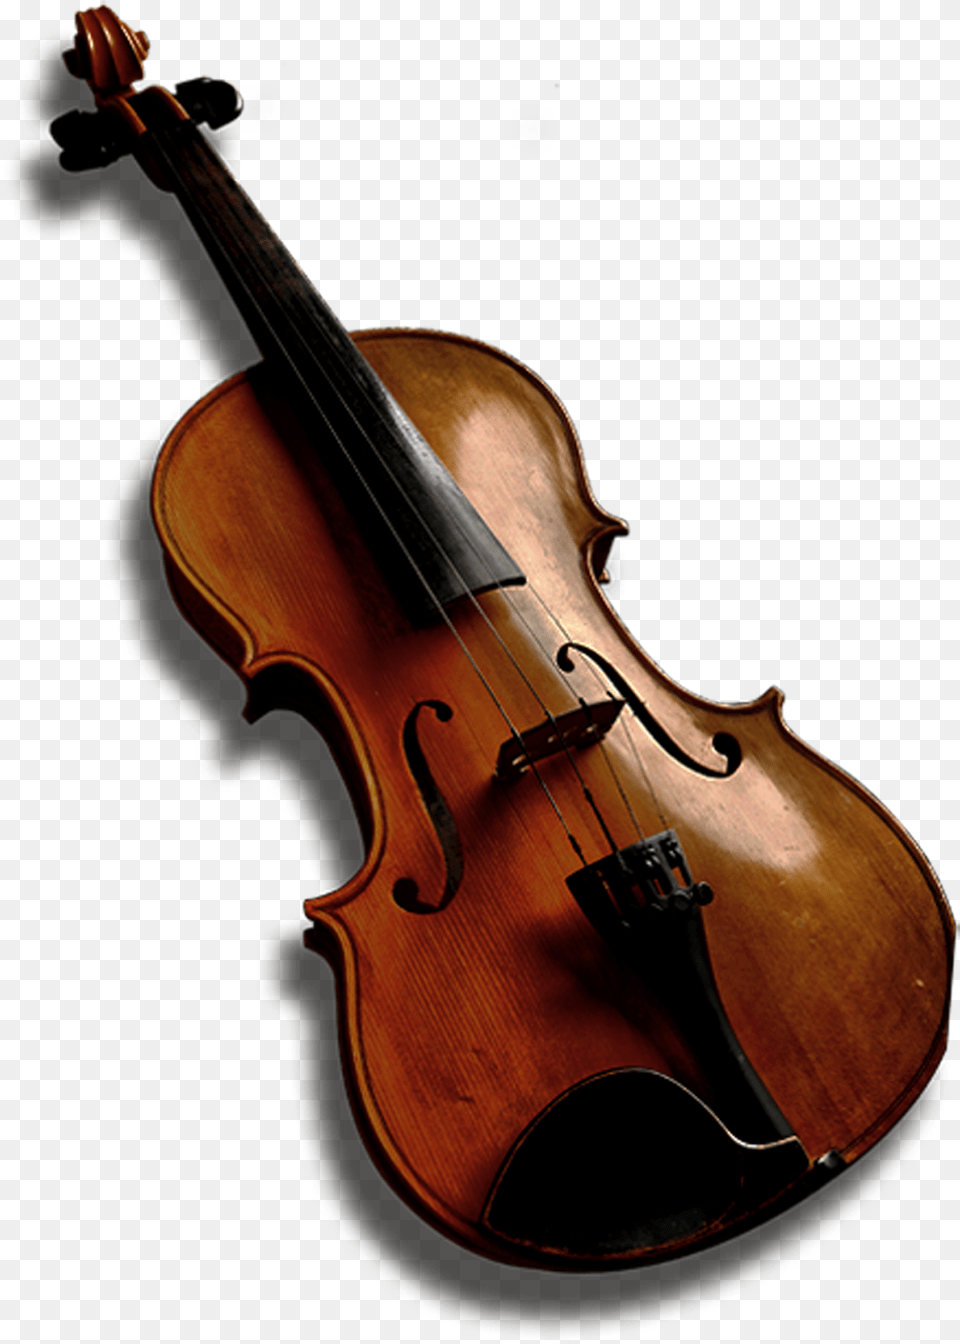 Bass Violin Viola Violone Double Bass Bass Violin, Musical Instrument, Cello Png